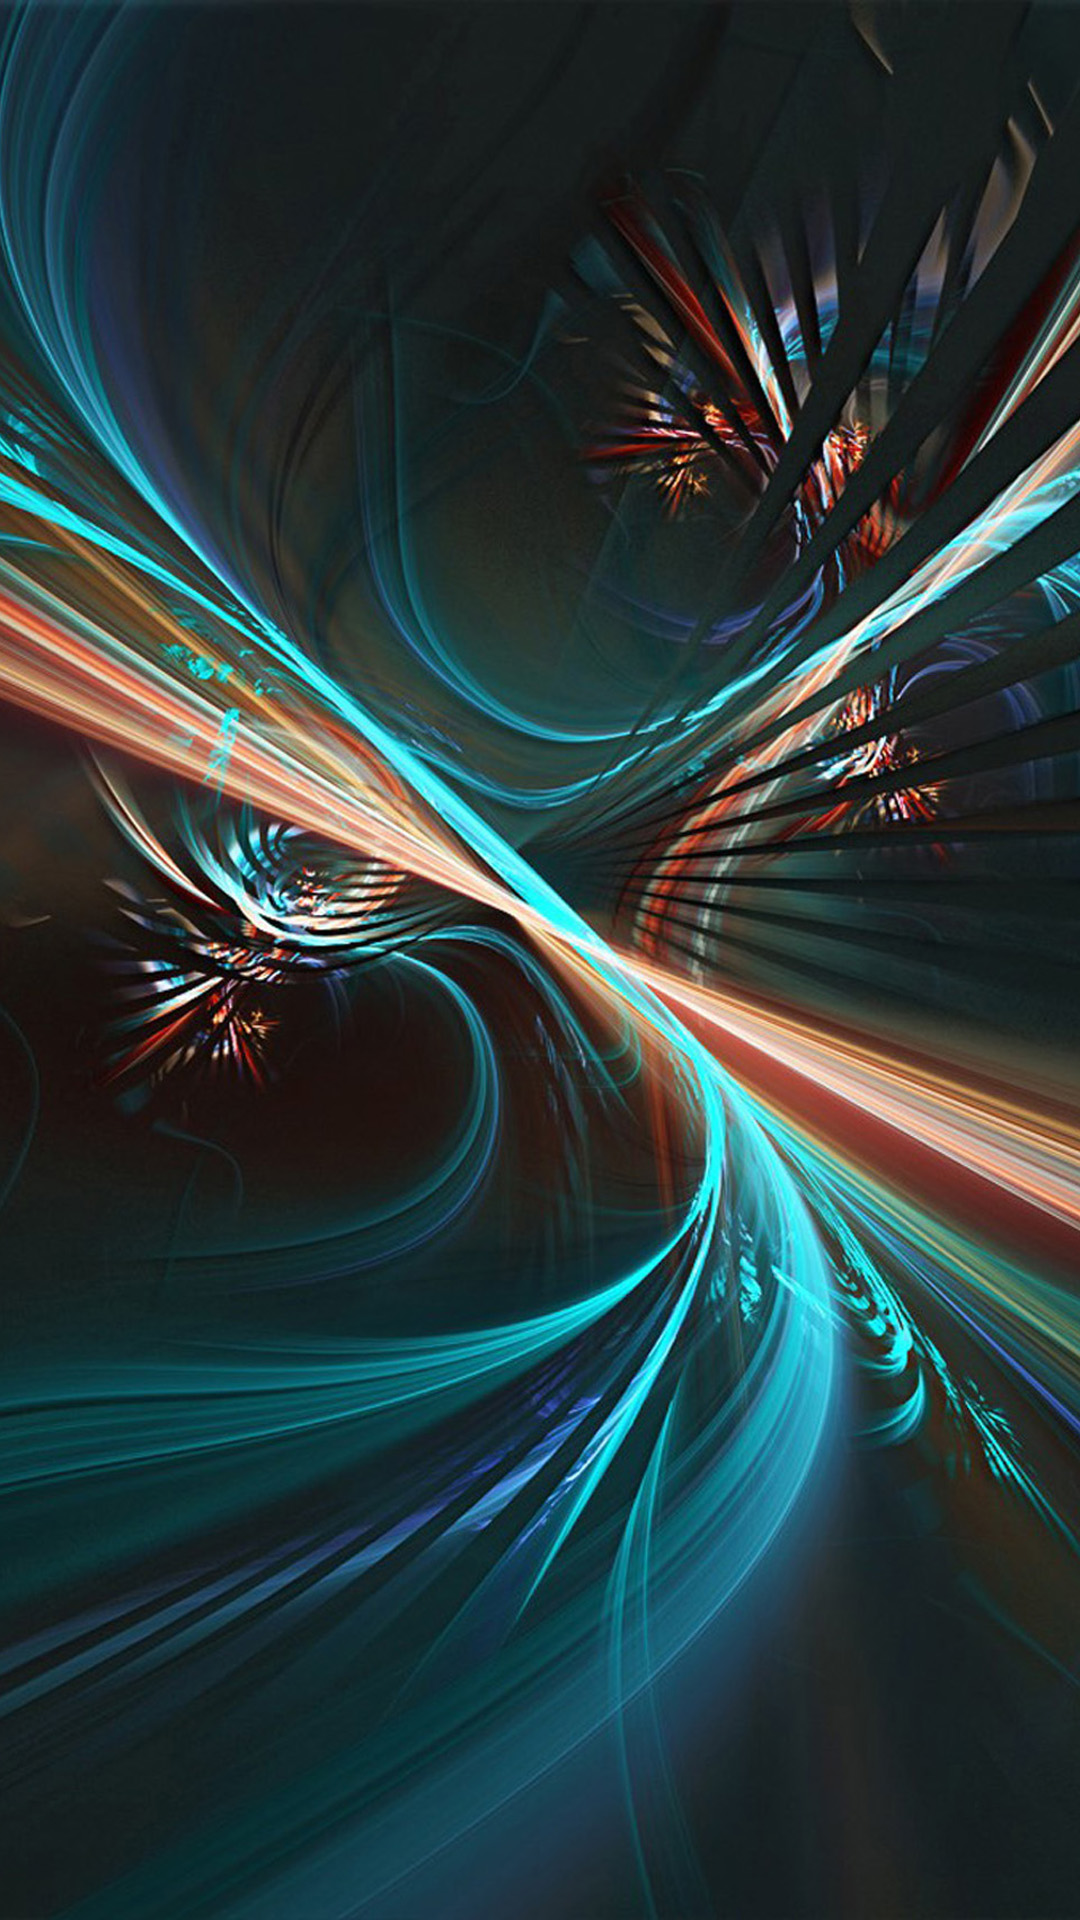 Abstract 3D iPhone 6 Wallpaper resolution 1080x1920